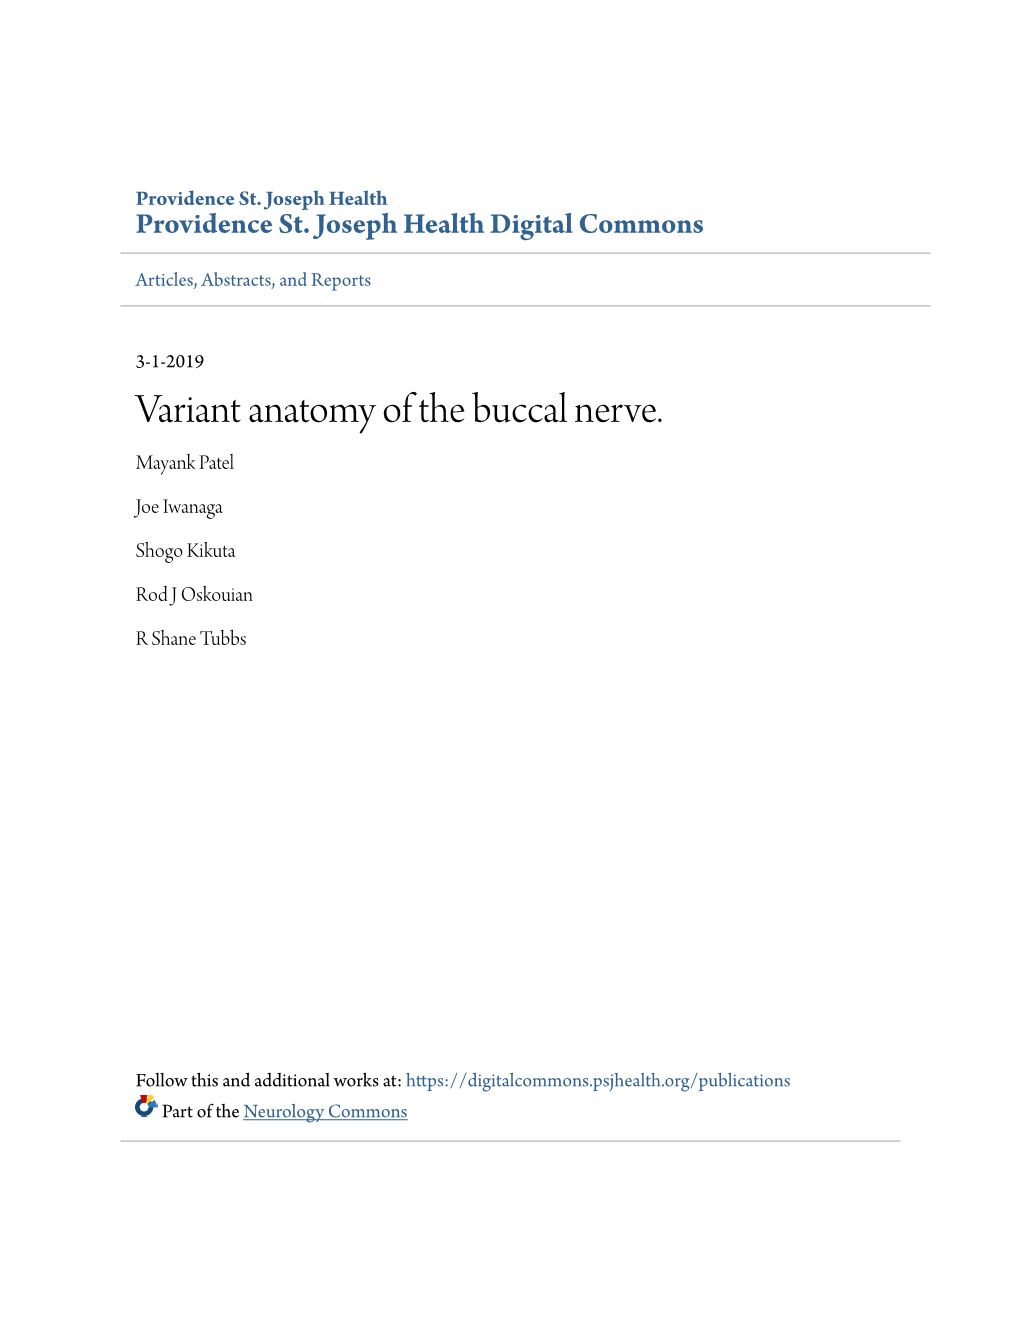 Variant Anatomy of the Buccal Nerve. Mayank Patel